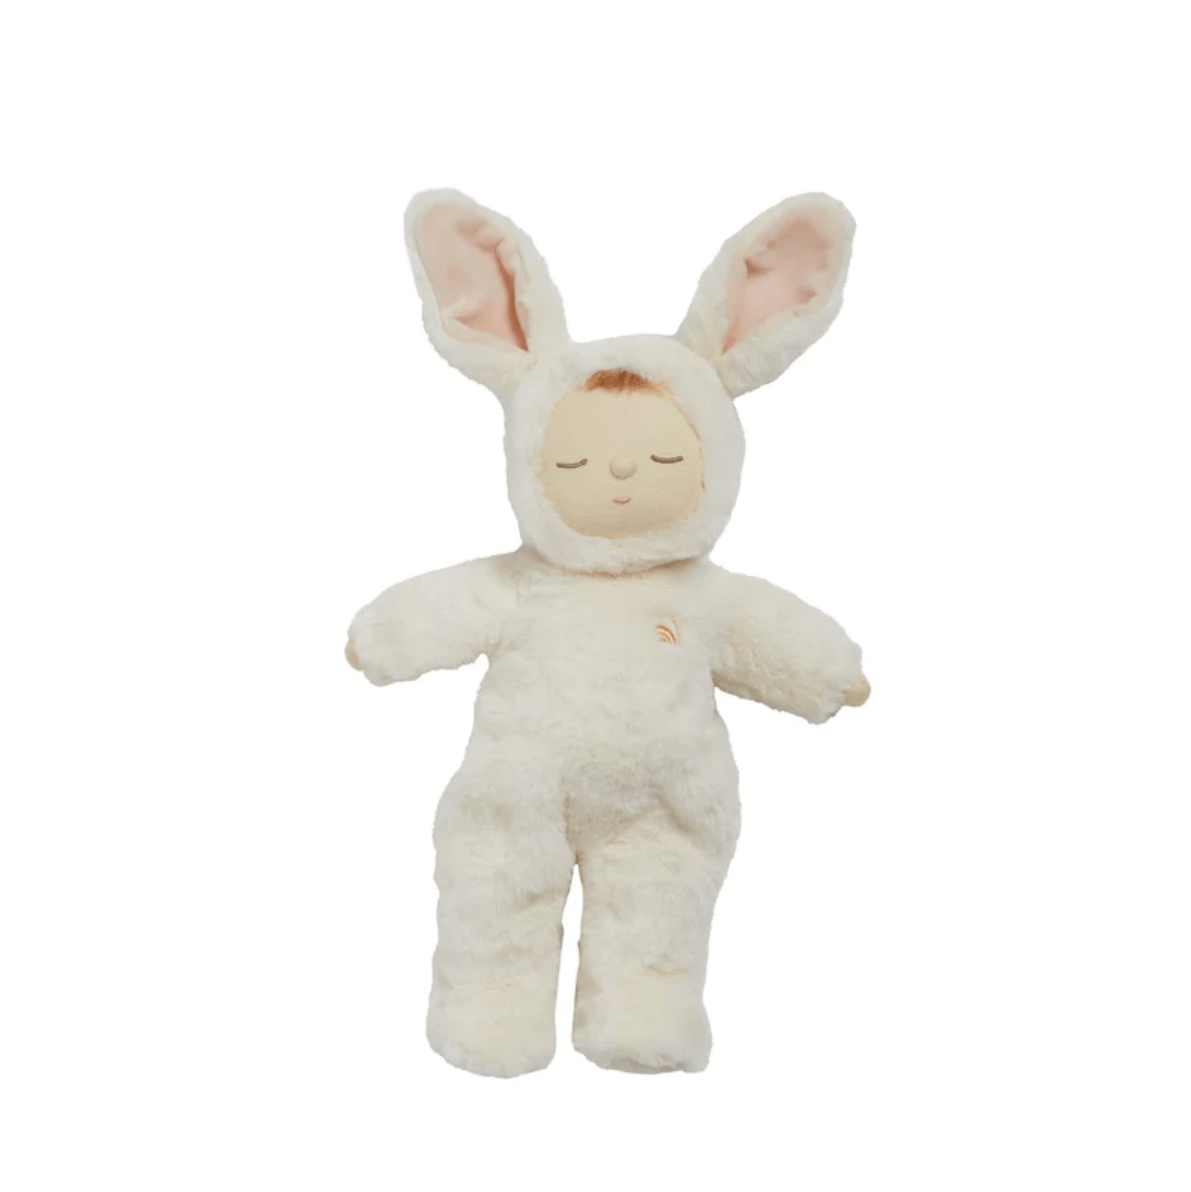 Olli Ella Soft Toys Cozy Dinkum Doll (Bunny Moppet) by Olli Ella Mousy Pickle Cozy Dinkum Doll | Plush Cotton Cuddly Companion for Newborns and Toddlers